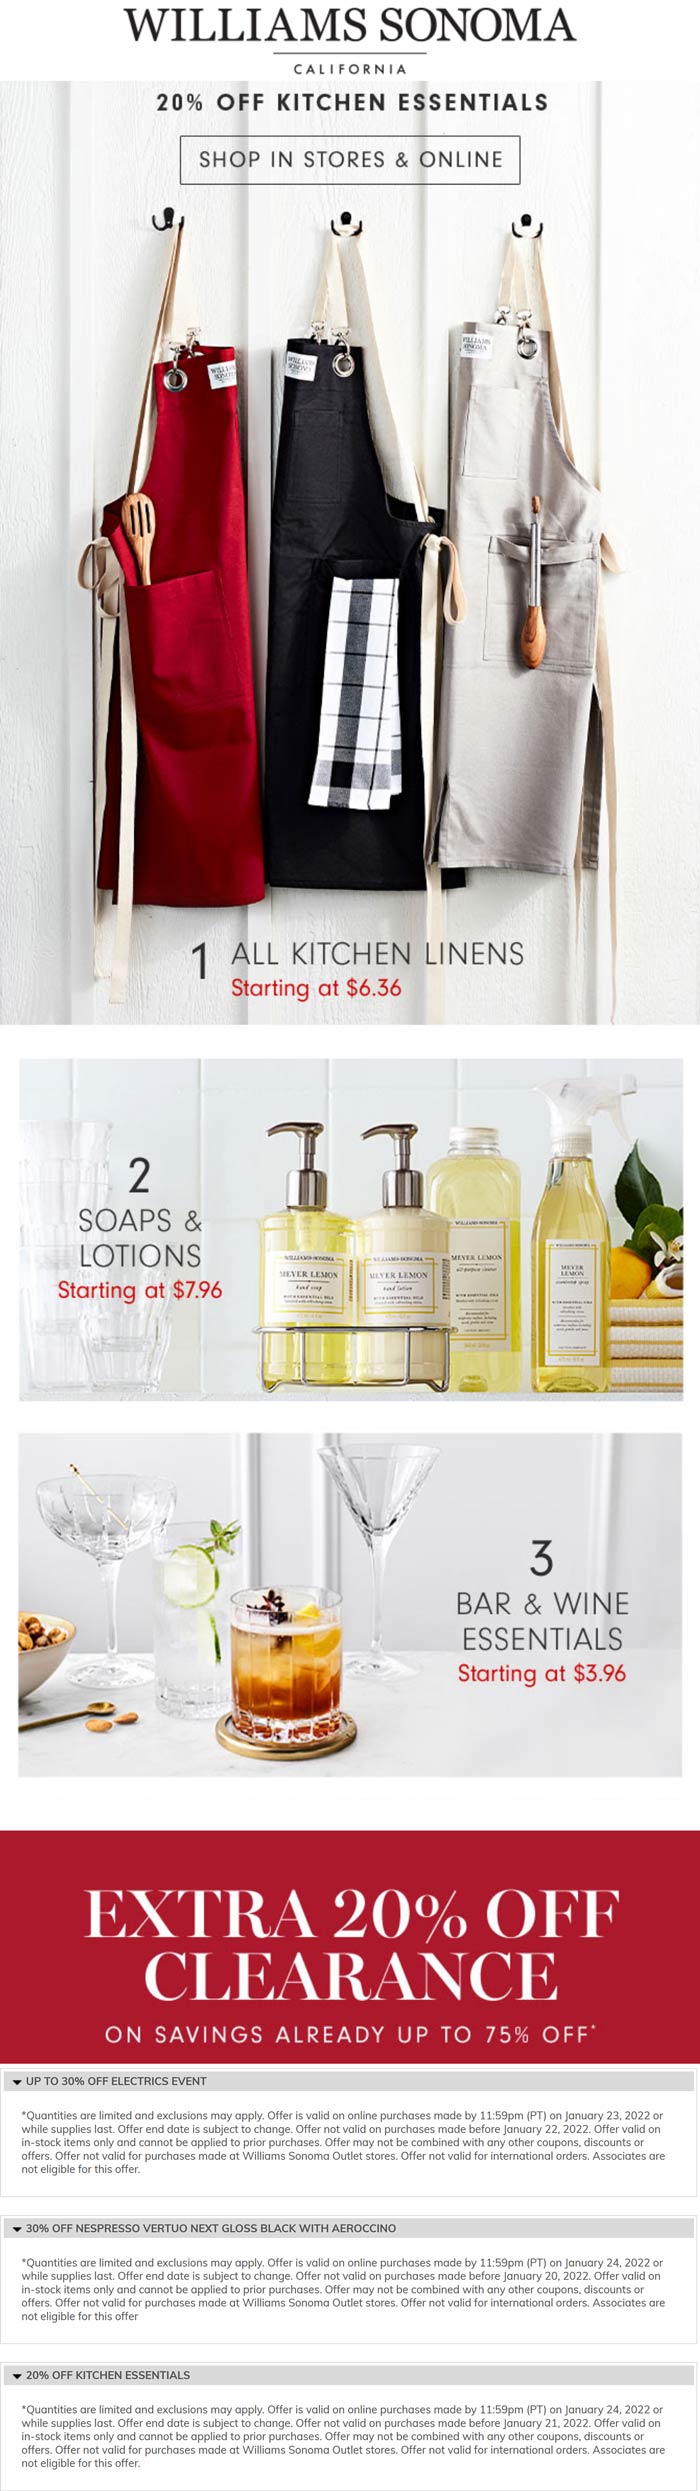 Williams Sonoma stores Coupon  20% off kitchen essentials & clearance at Williams Sonoma, ditto online #williamssonoma 